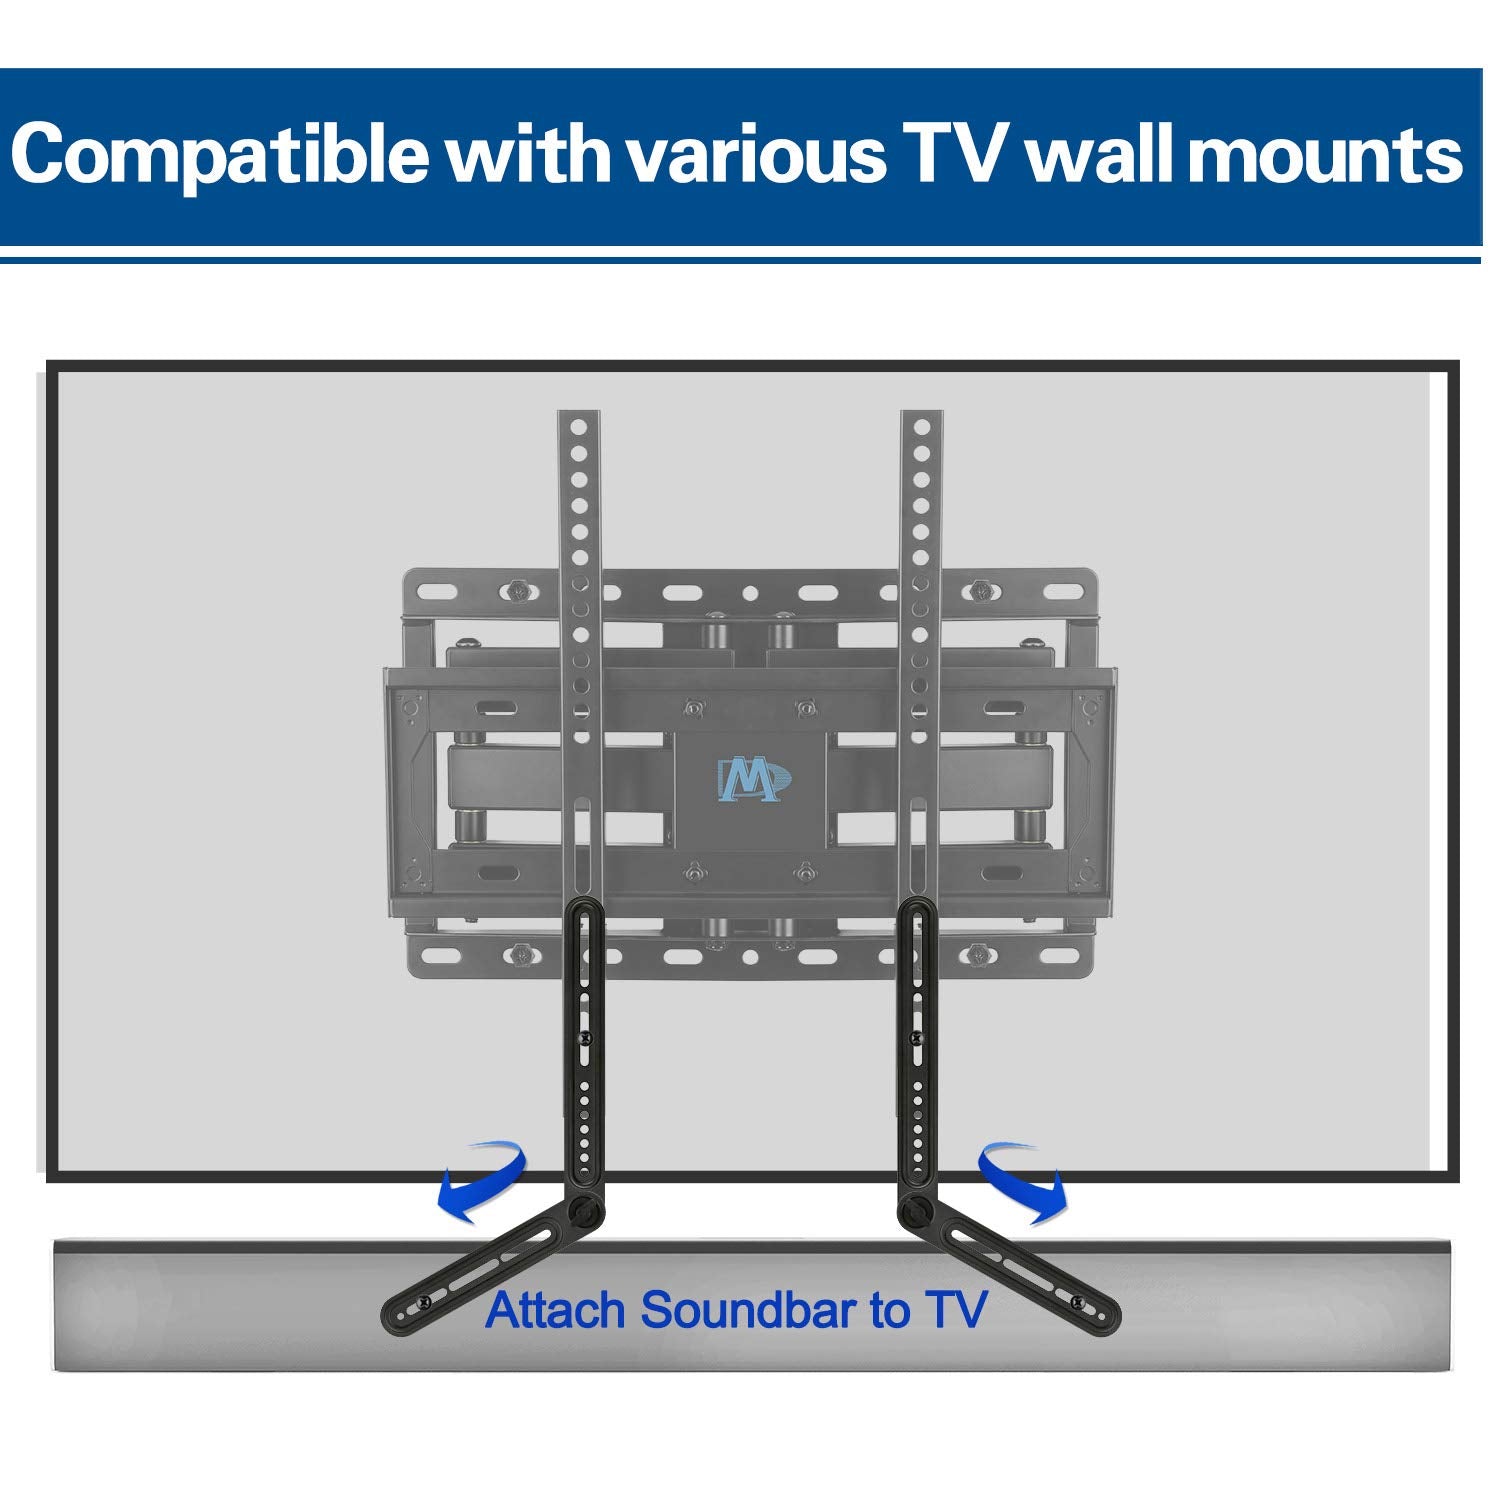 attach to the tv wall mount to mount a soundbar